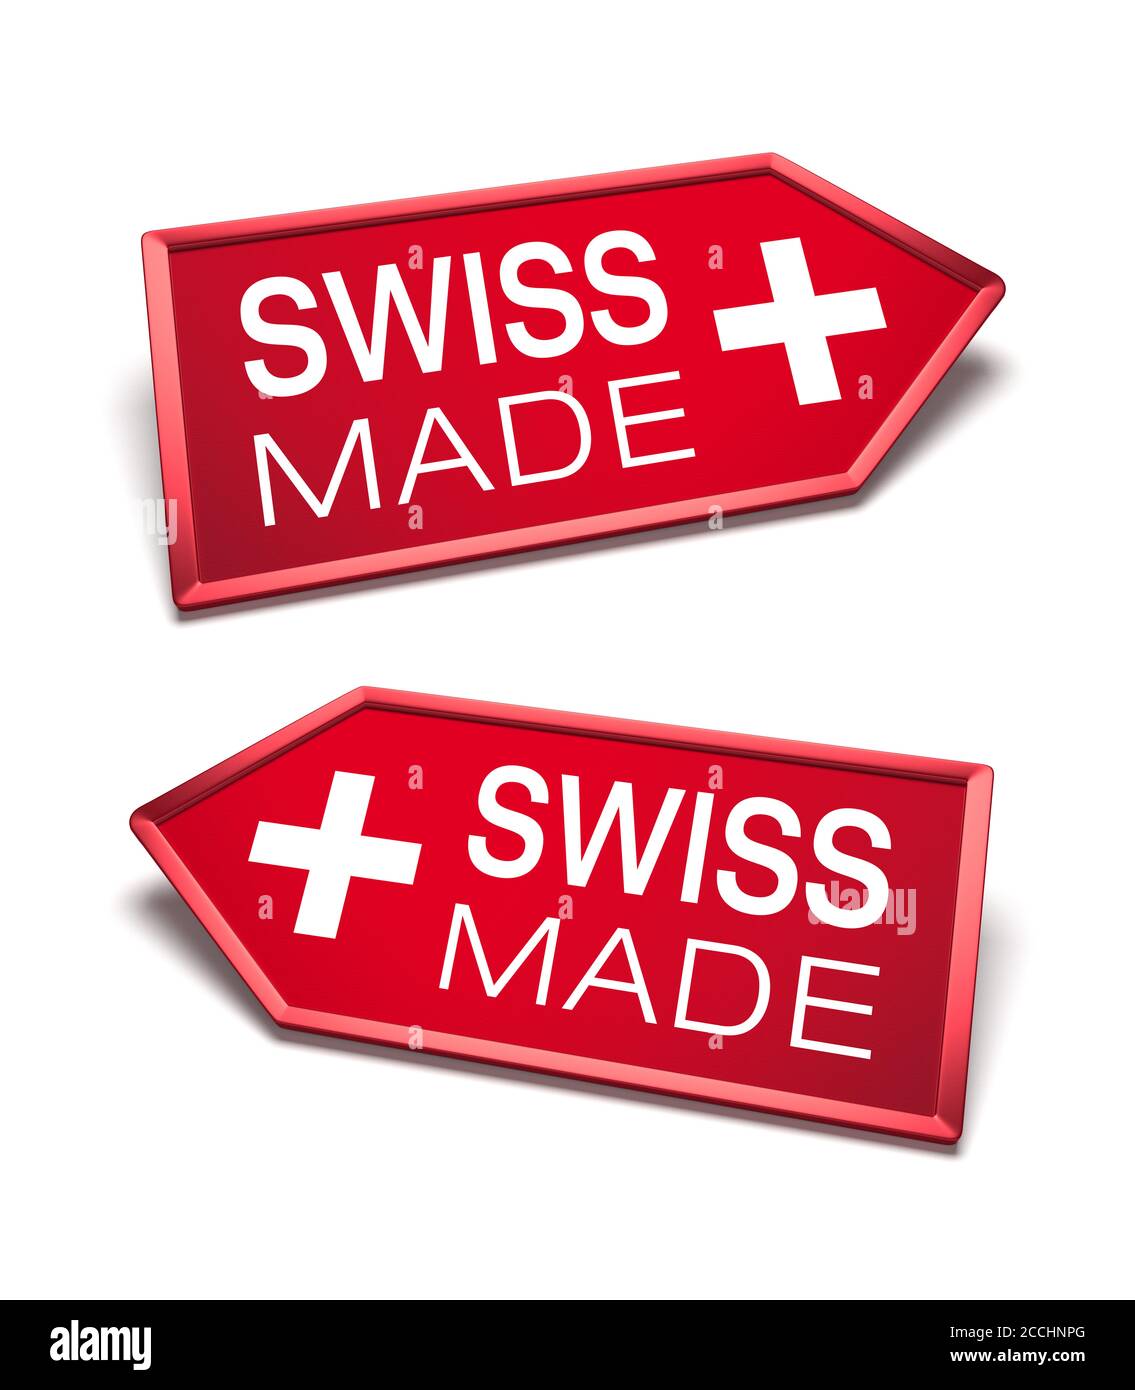 Made in Switzerland. Swiss made certificate inside arrow icon shapes, pointing left and right. Stock Photo